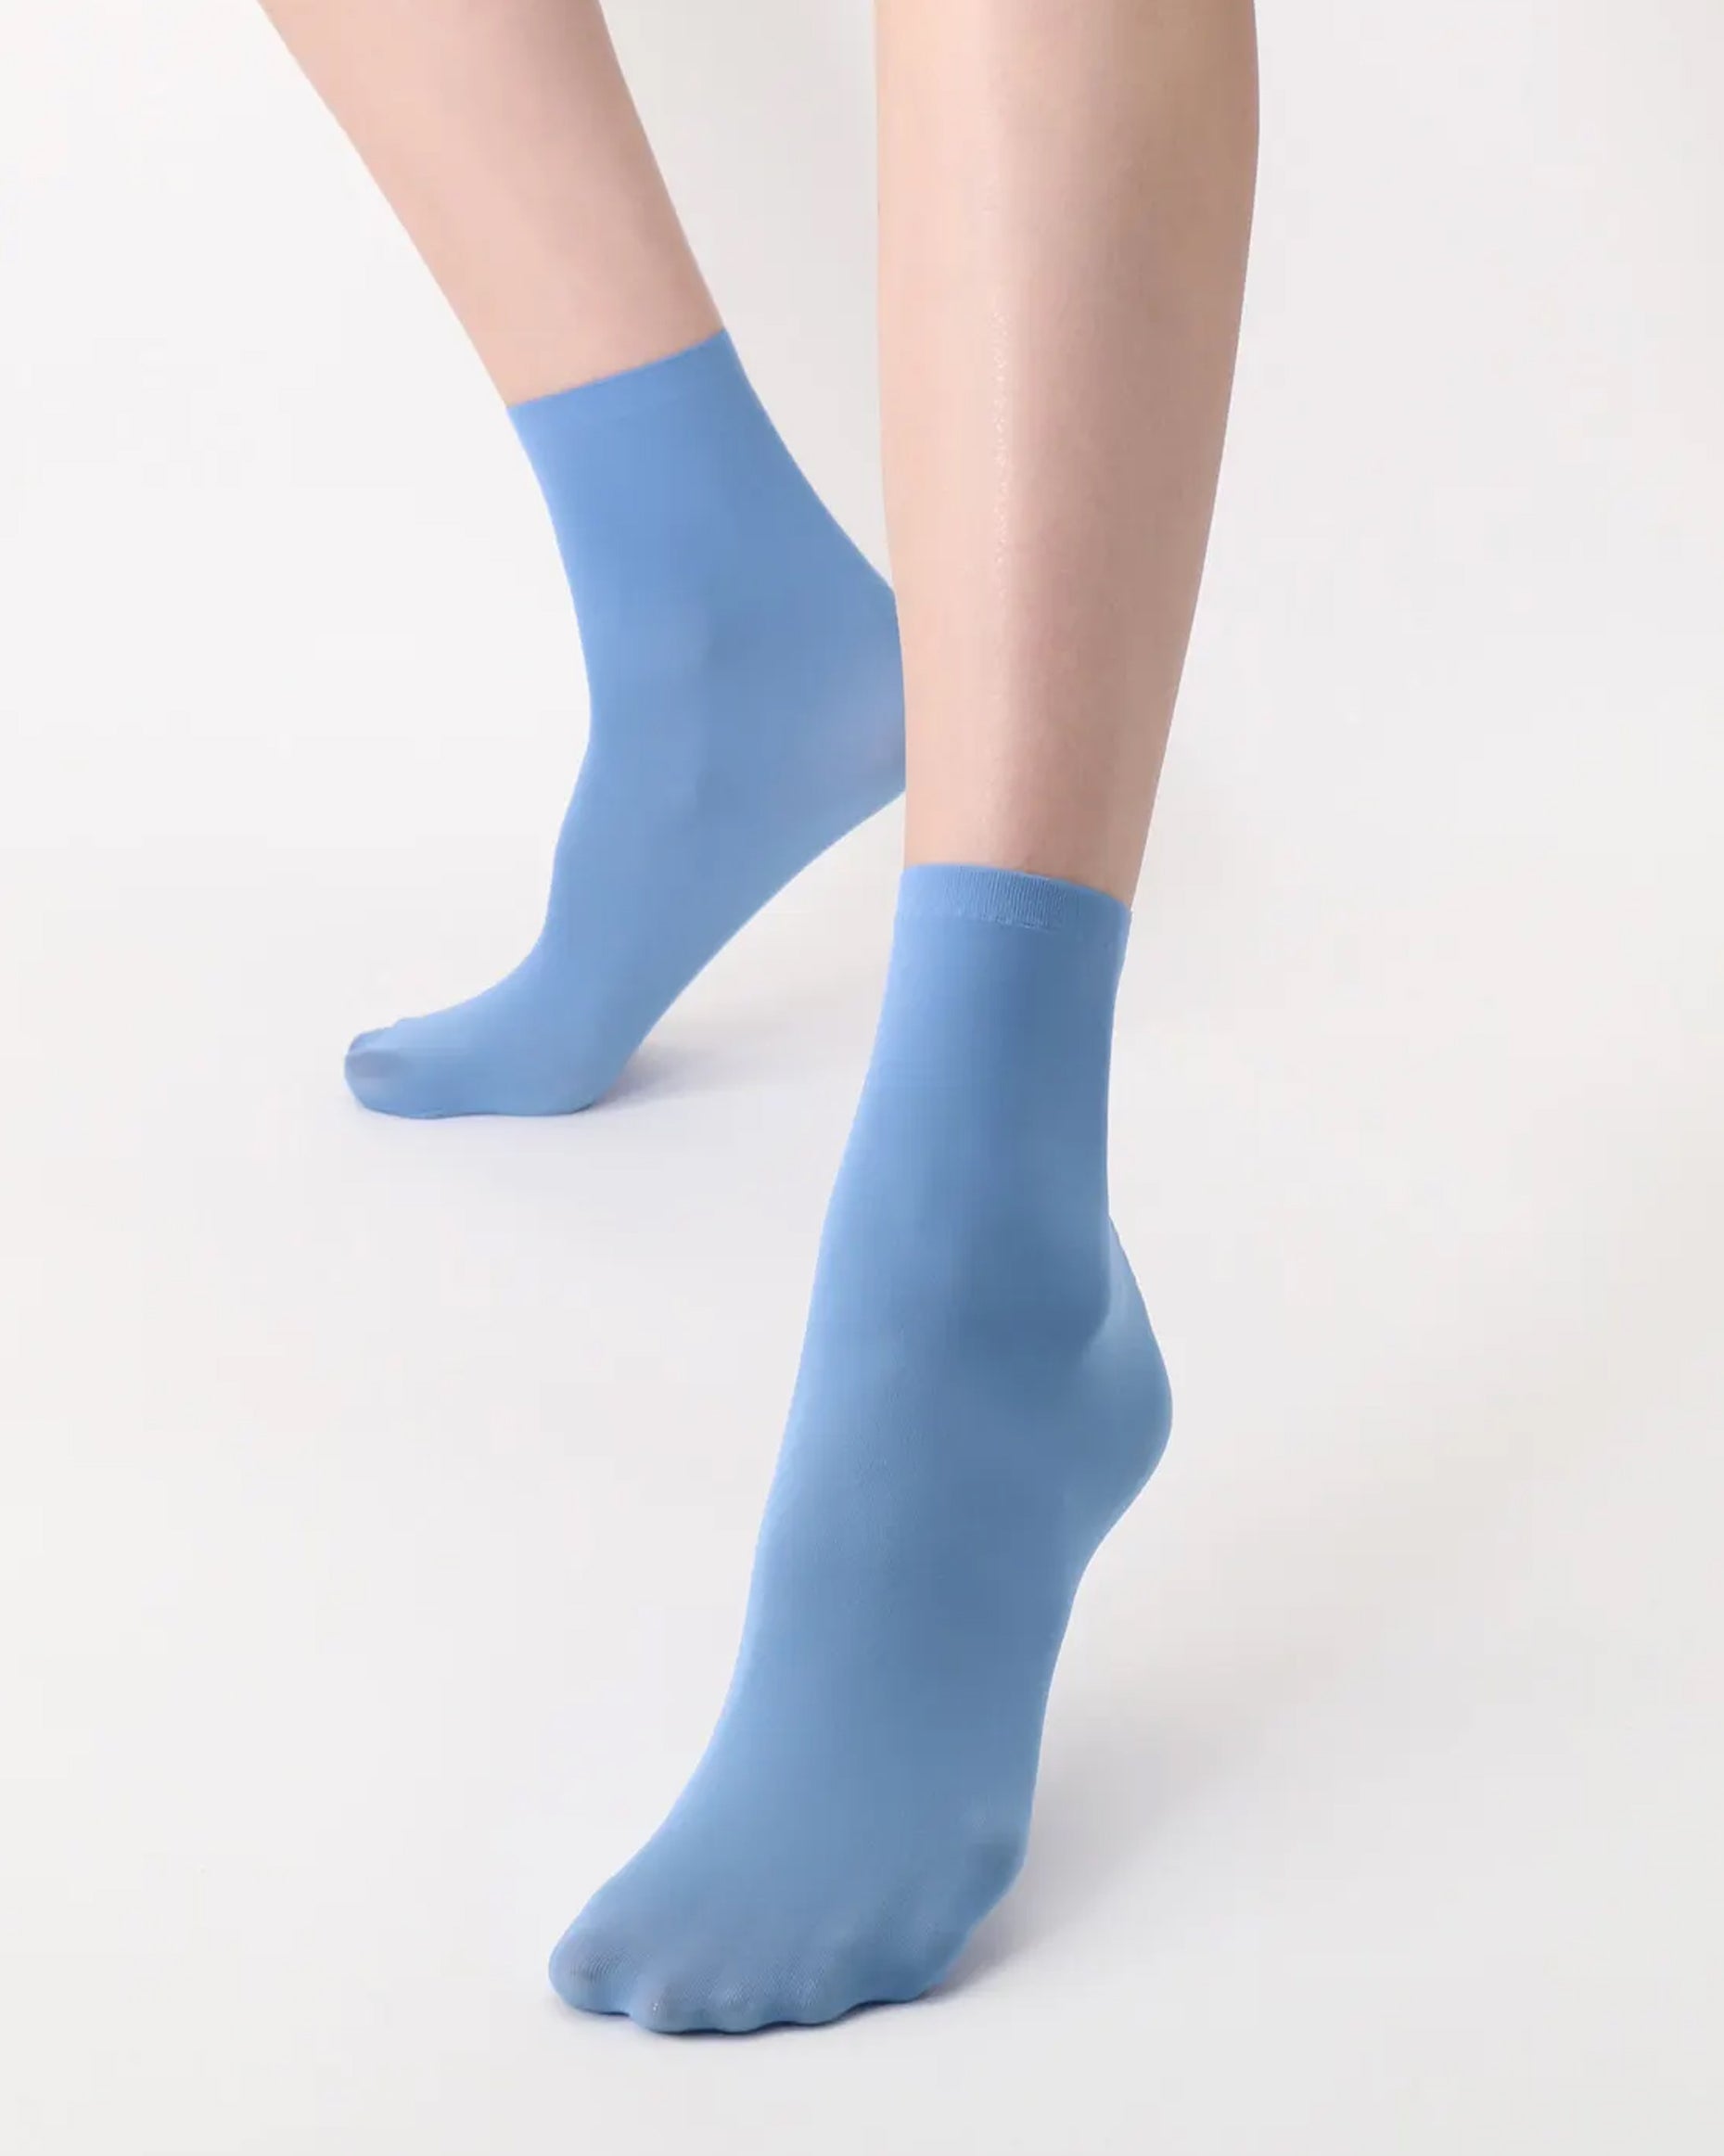 Oroblù All Colors Sock - Soft plain sky blue opaque ankle tube socks with plain cuff.